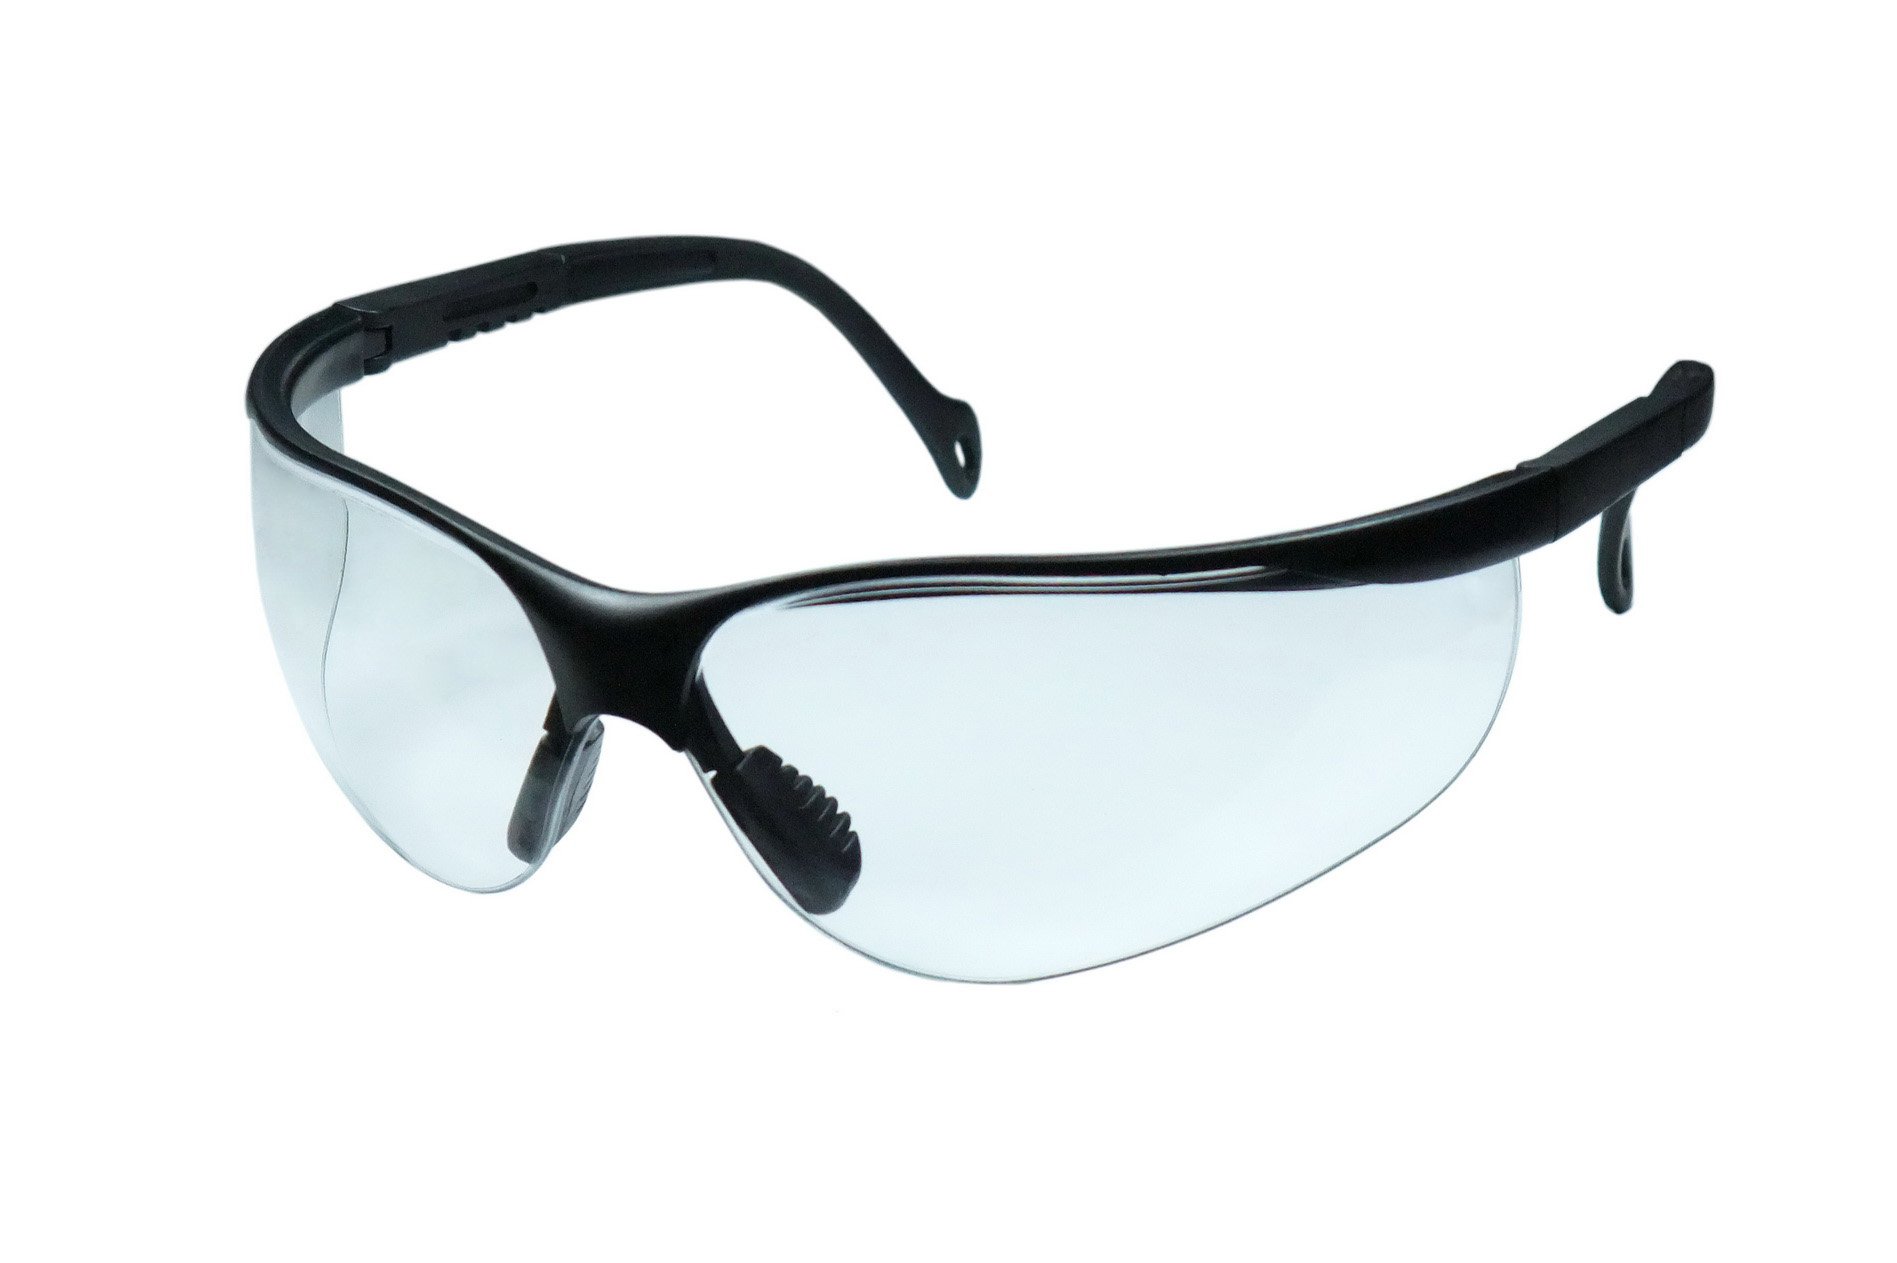 Free Protective Glasses Cliparts, Download Free Clip Art.